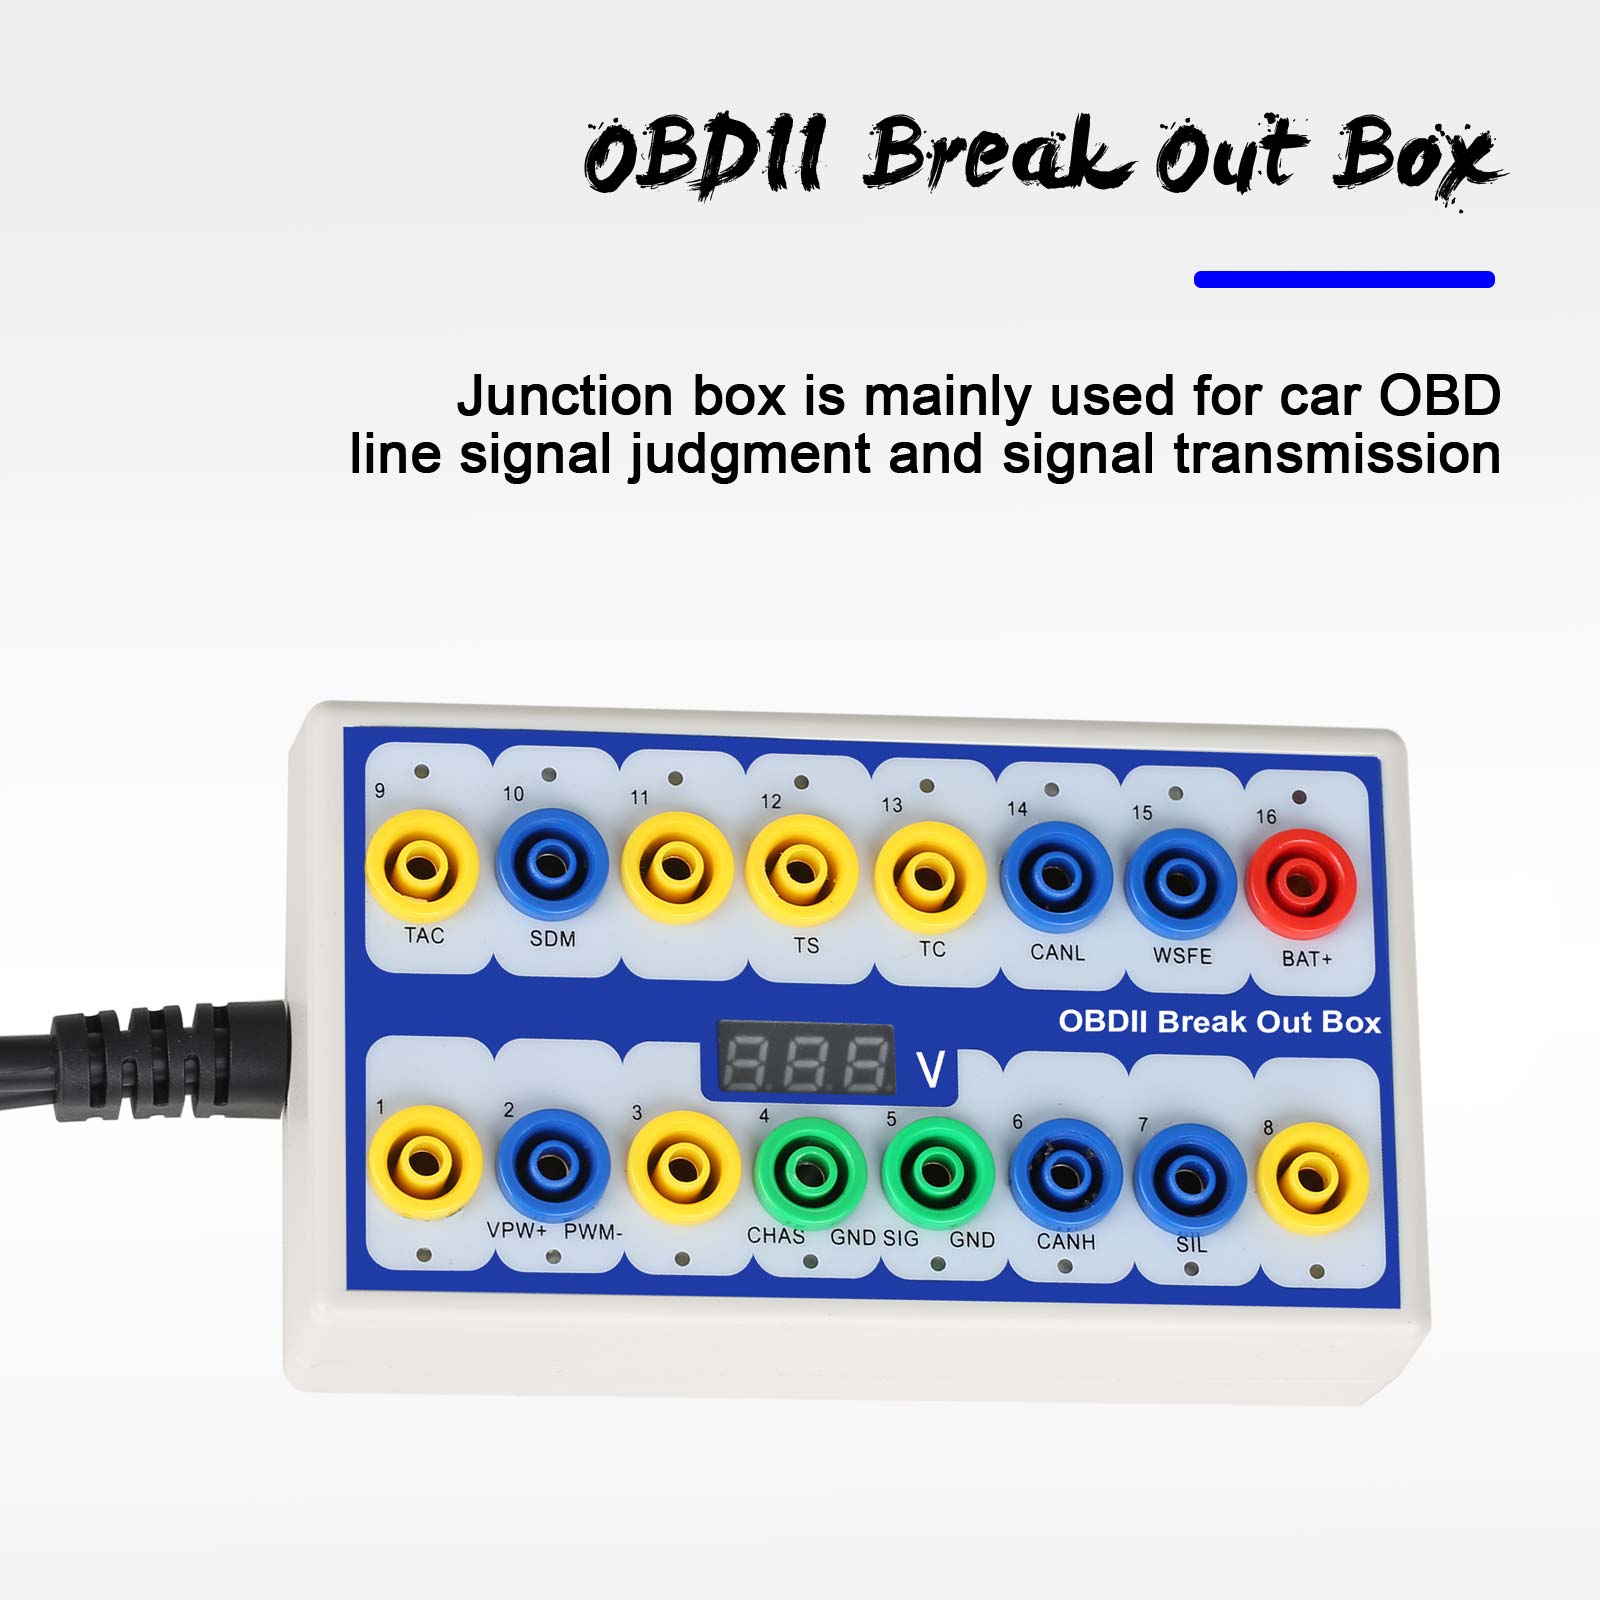 OBD2 Breakout Box Diagnosis Scan Tool for Monitoring Signals of  Protocol/Power/Grounds,Automotive OBDII Protocol Monitor. Breakout Box for  OBDII